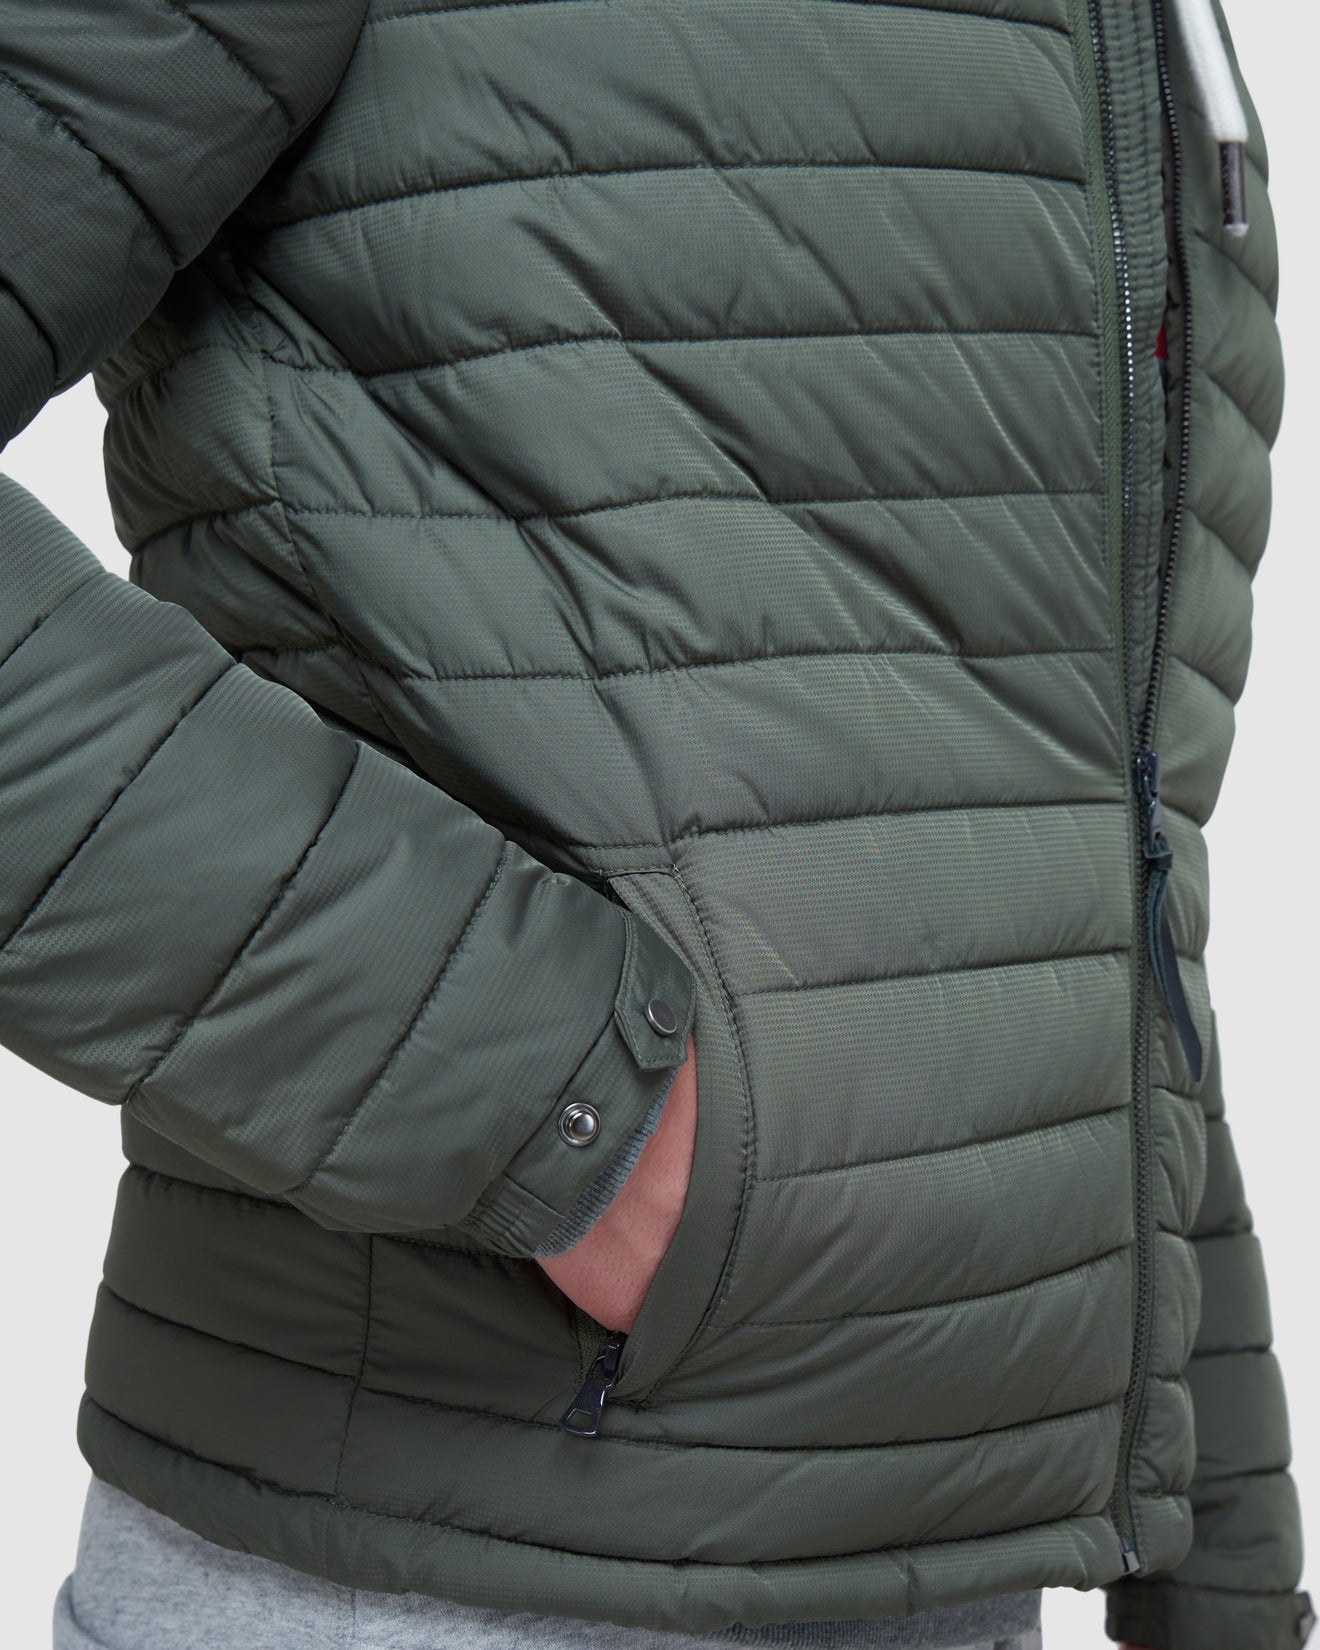 Superdry - Studios Non Hooded Fuji Thyme Green